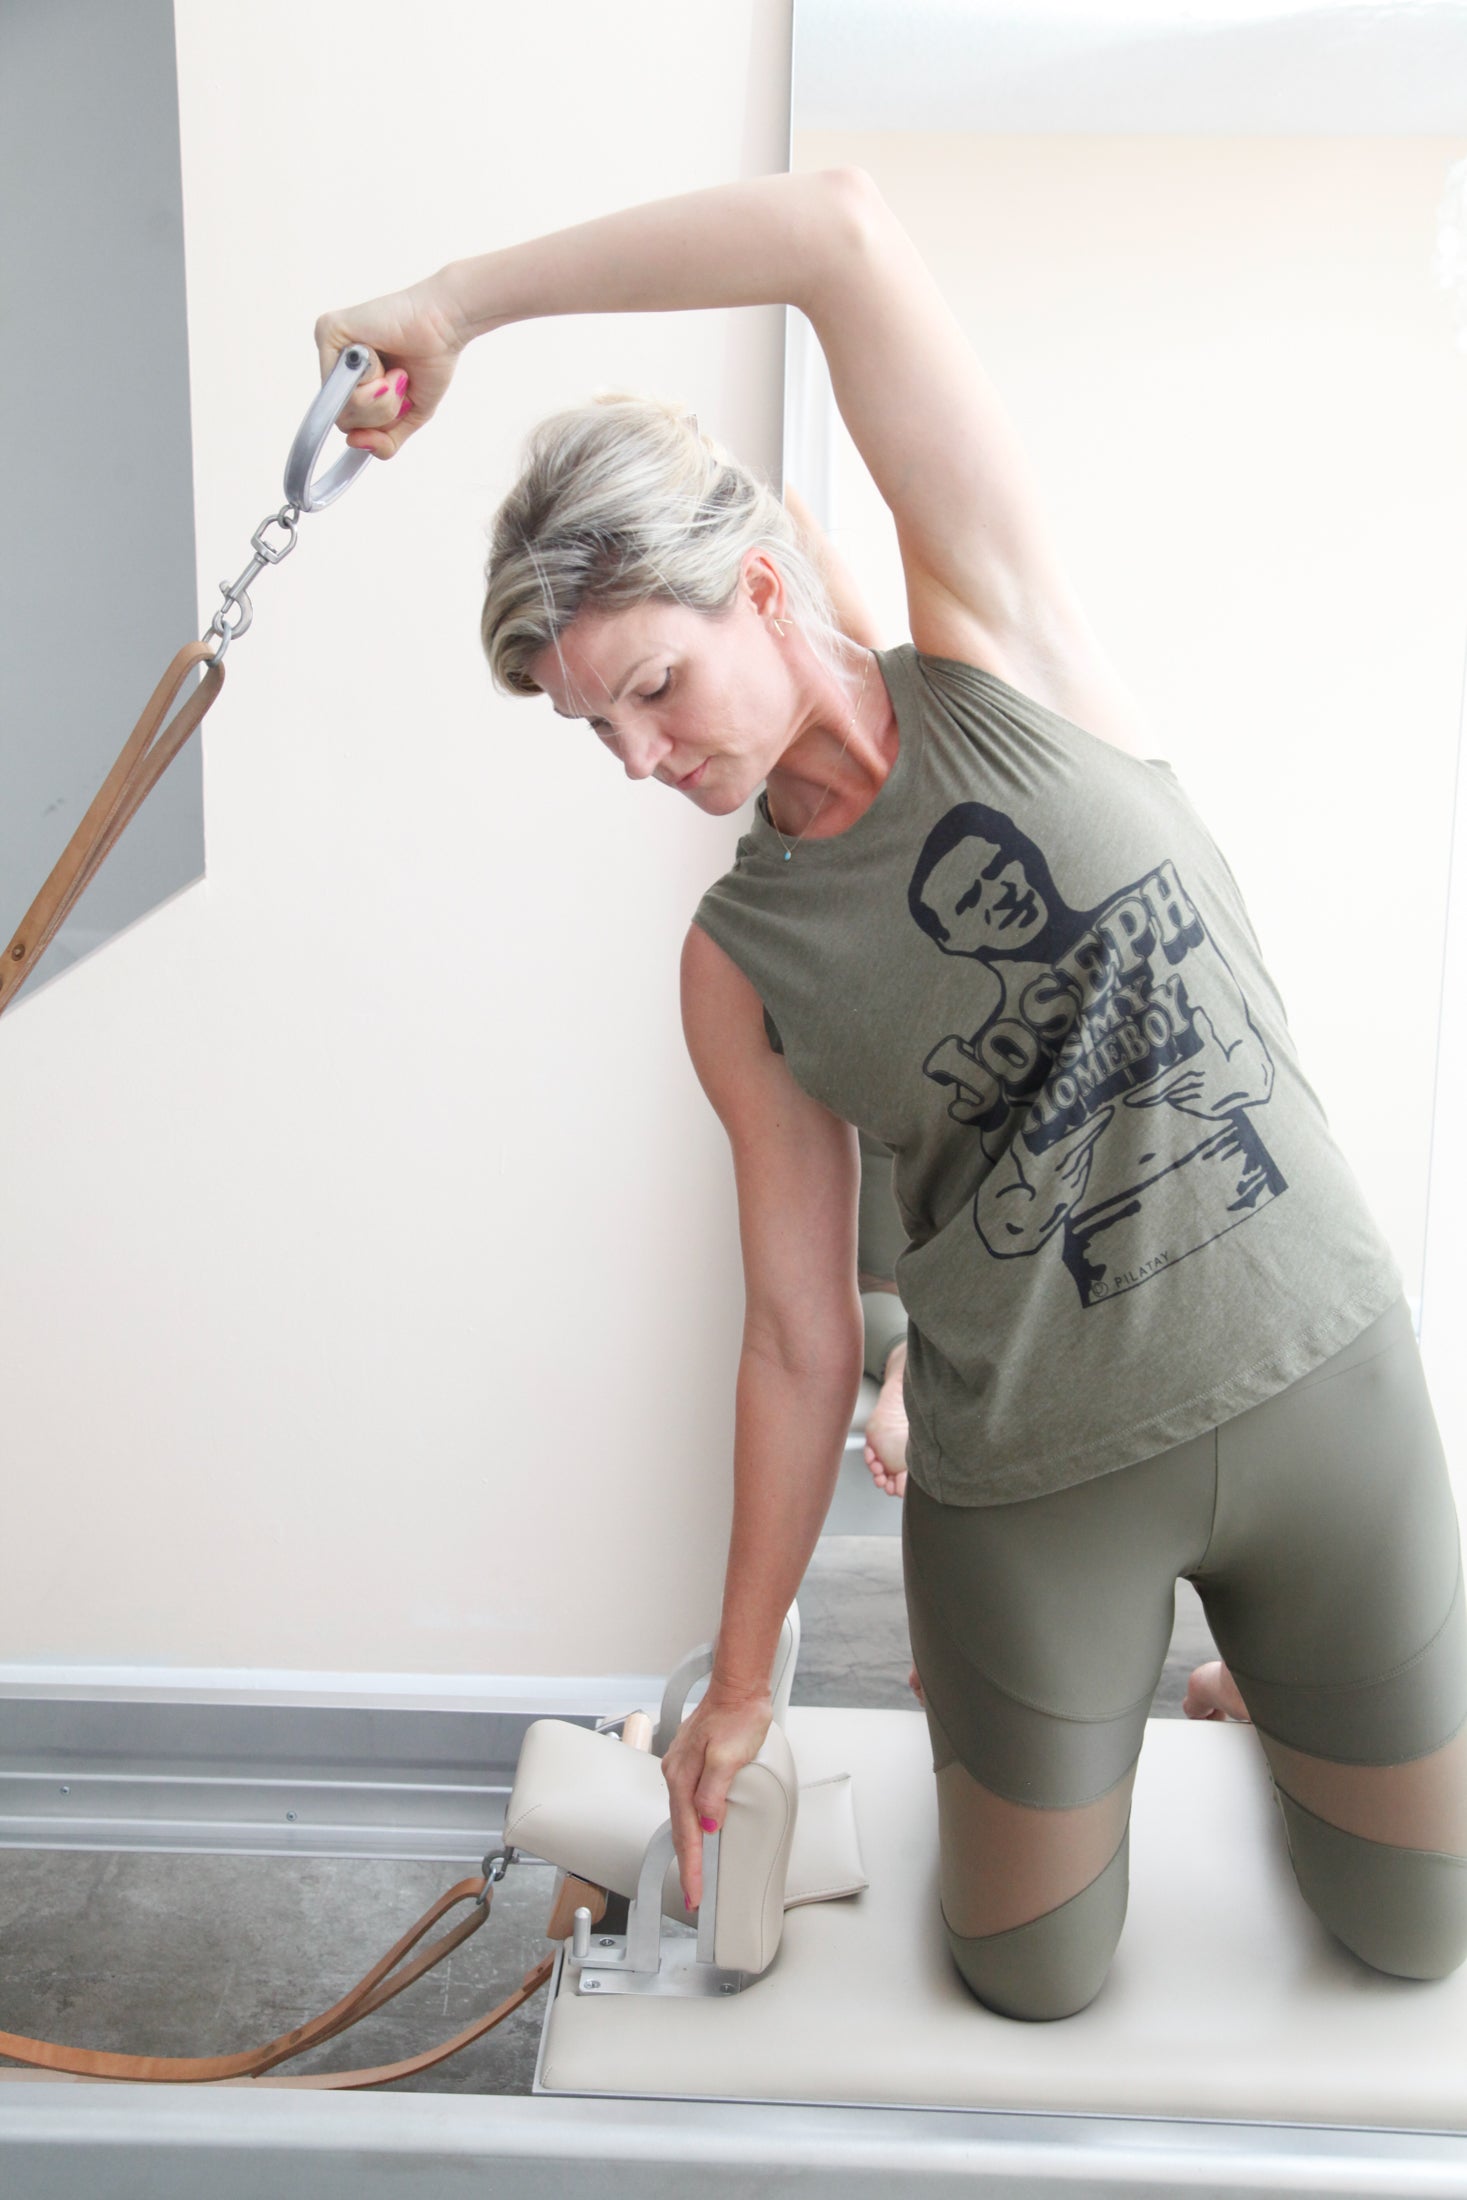 Joseph Pilates Shirt that has a drawing of joseph pilates holding the words Joseph is my homeboy 